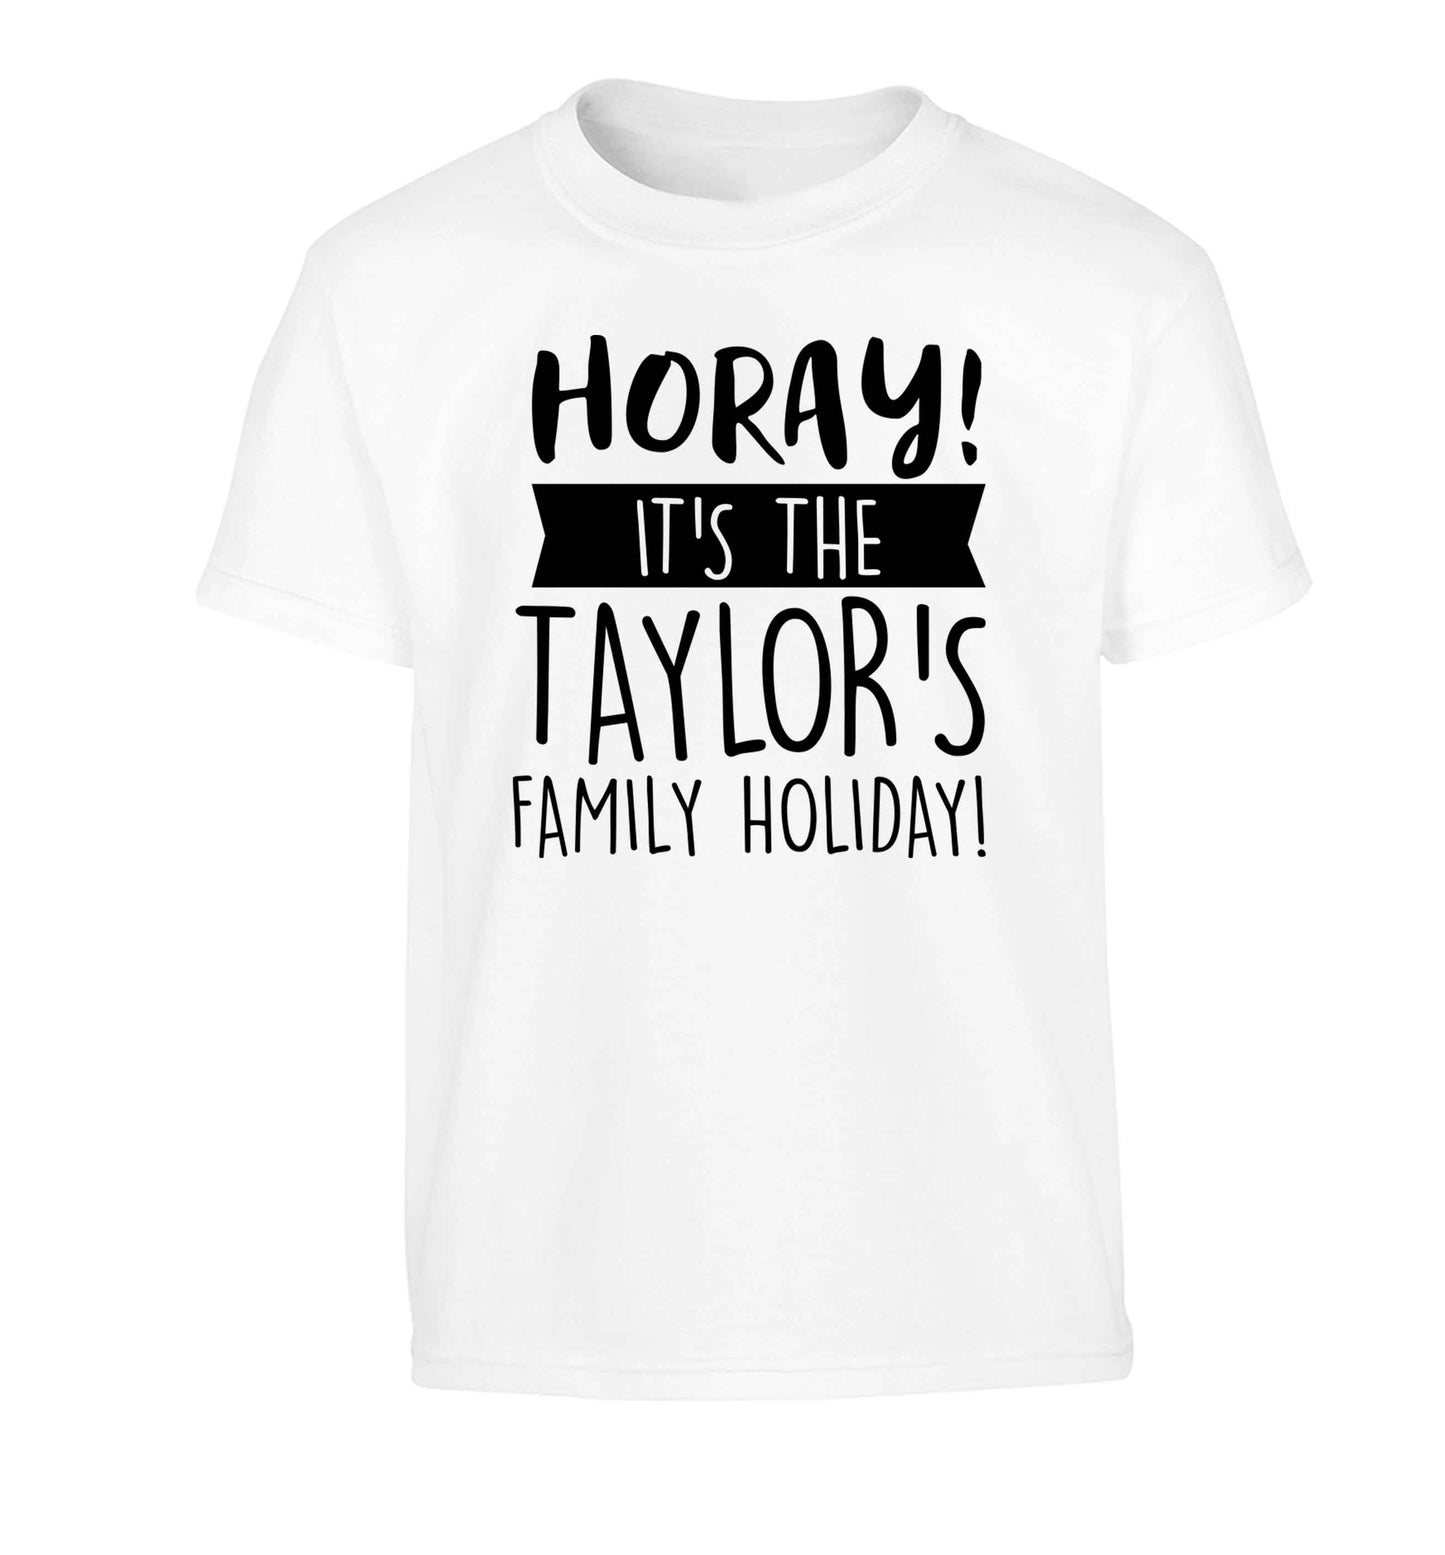 Horay it's the Taylor's family holiday! personalised item Children's white Tshirt 12-13 Years